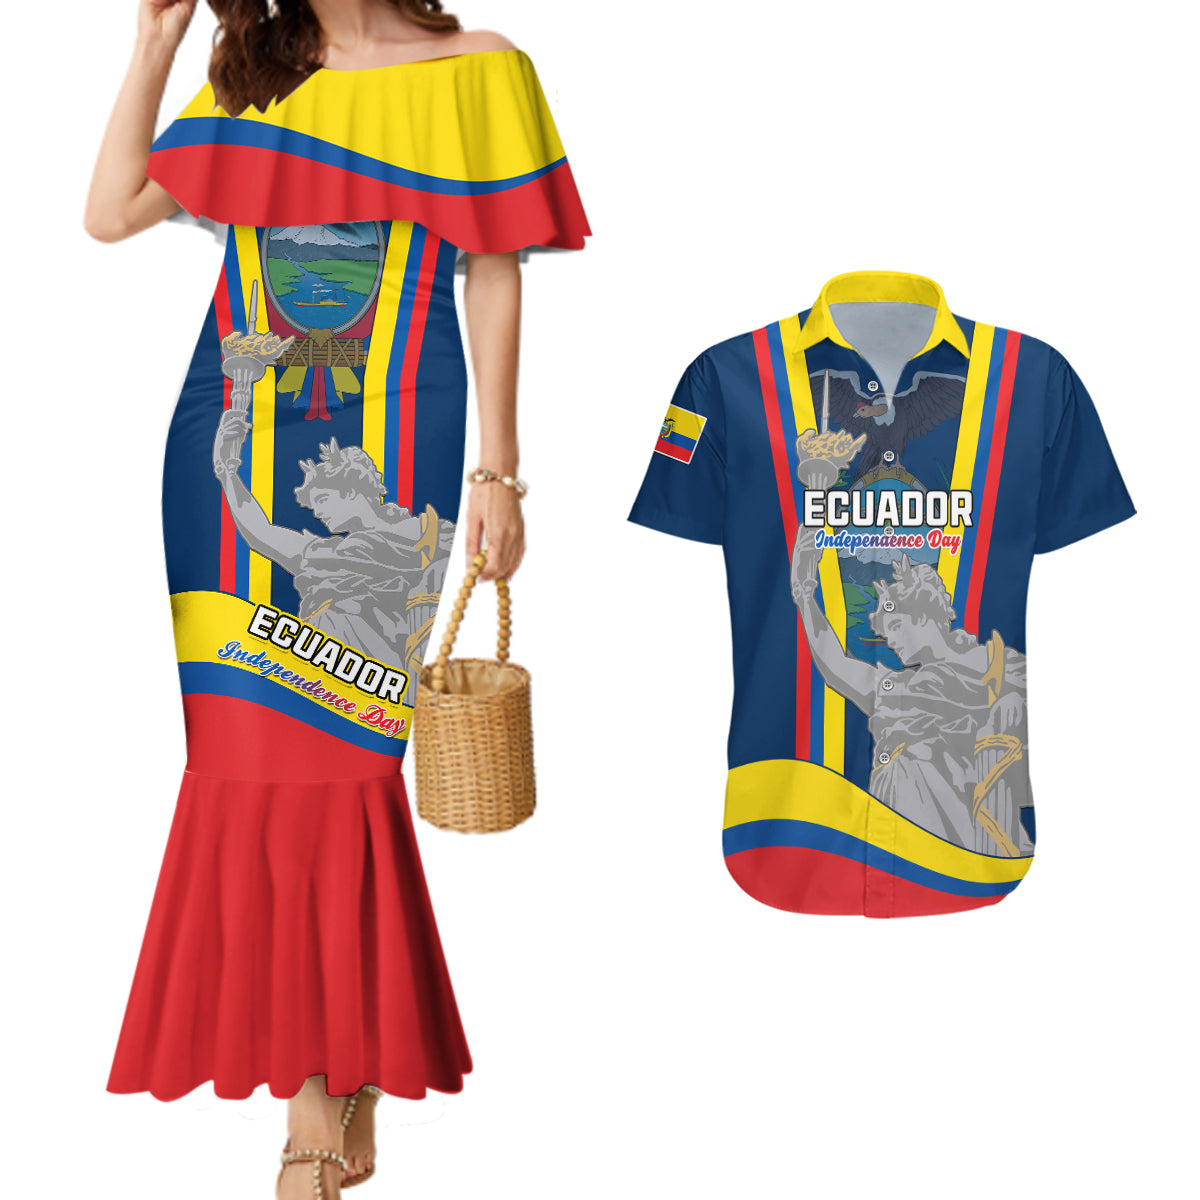 custom-ecuador-independence-day-couples-matching-mermaid-dress-and-hawaiian-shirt-monumento-a-la-independencia-quito-10th-august